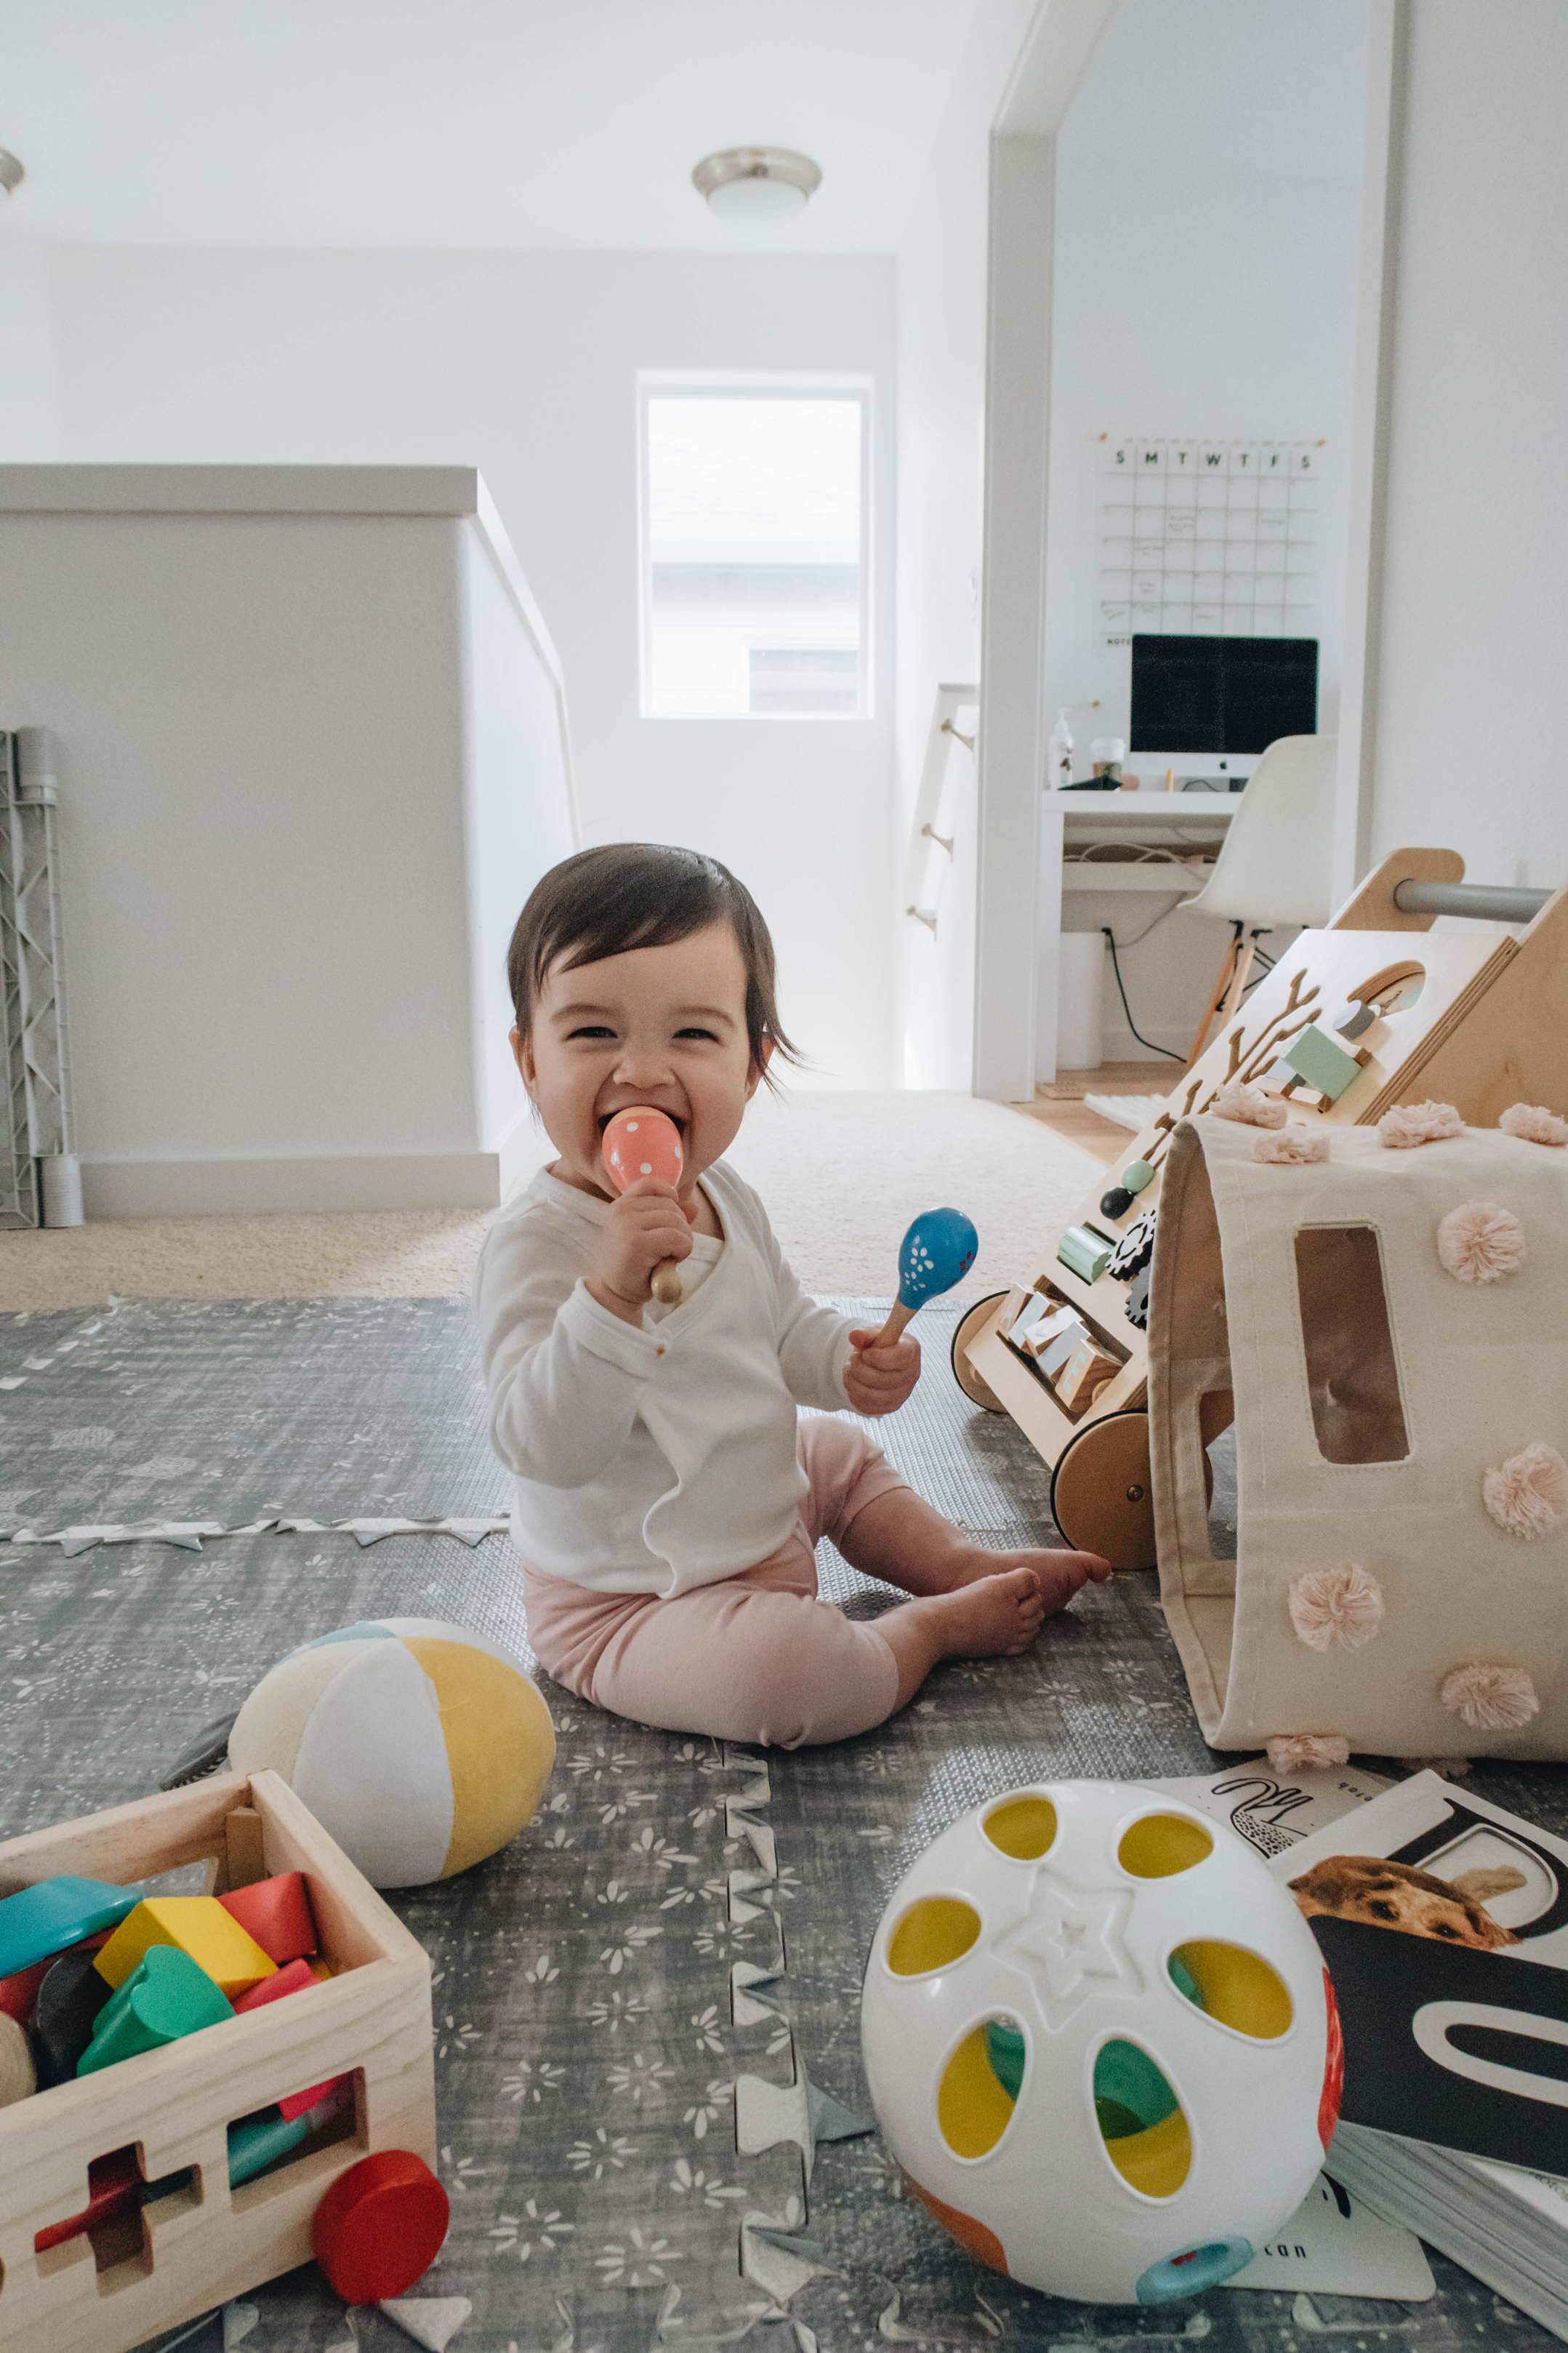 Our Top 10 Baby Toys